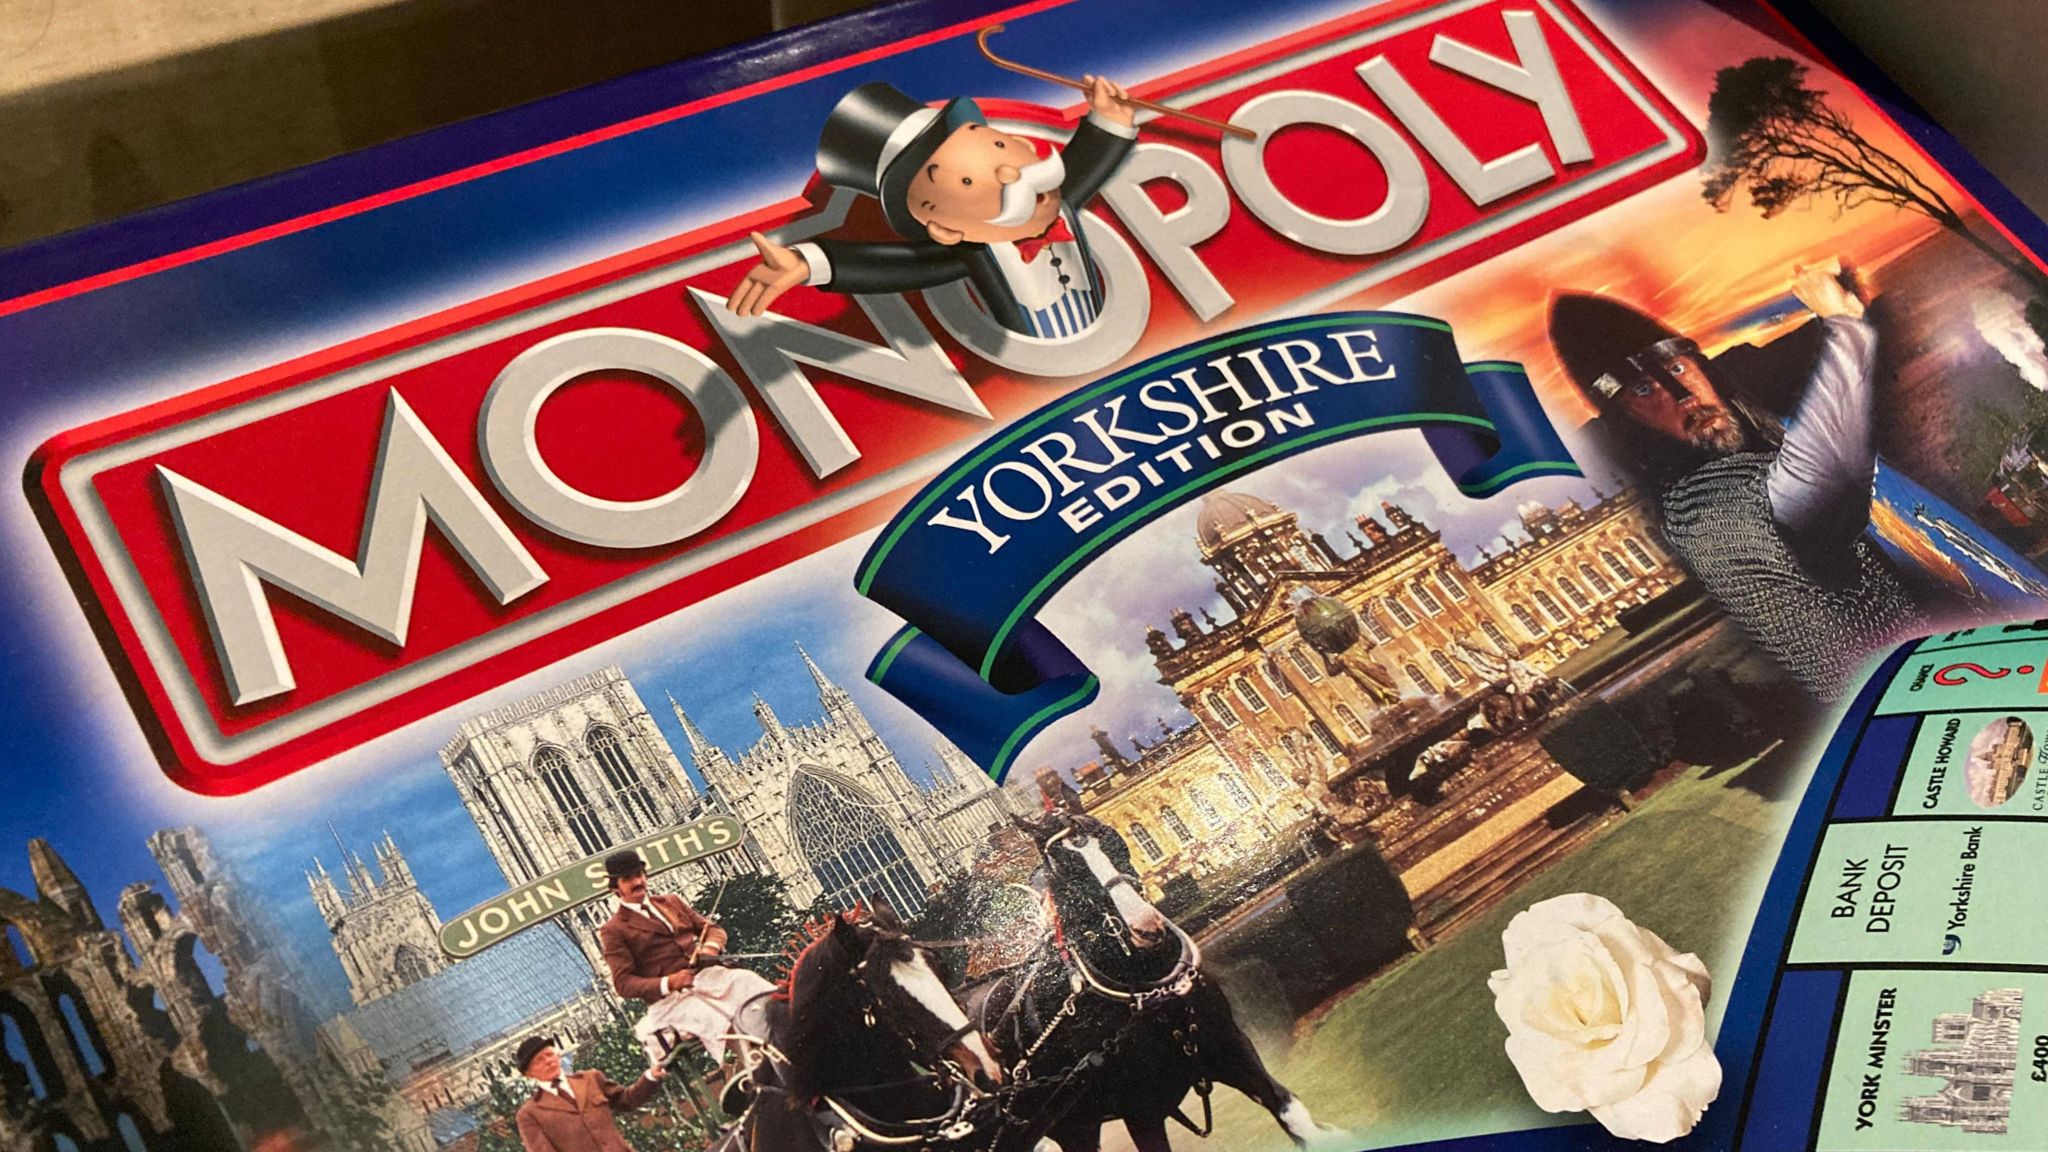 Monopoly game on display at Leeds City Museum